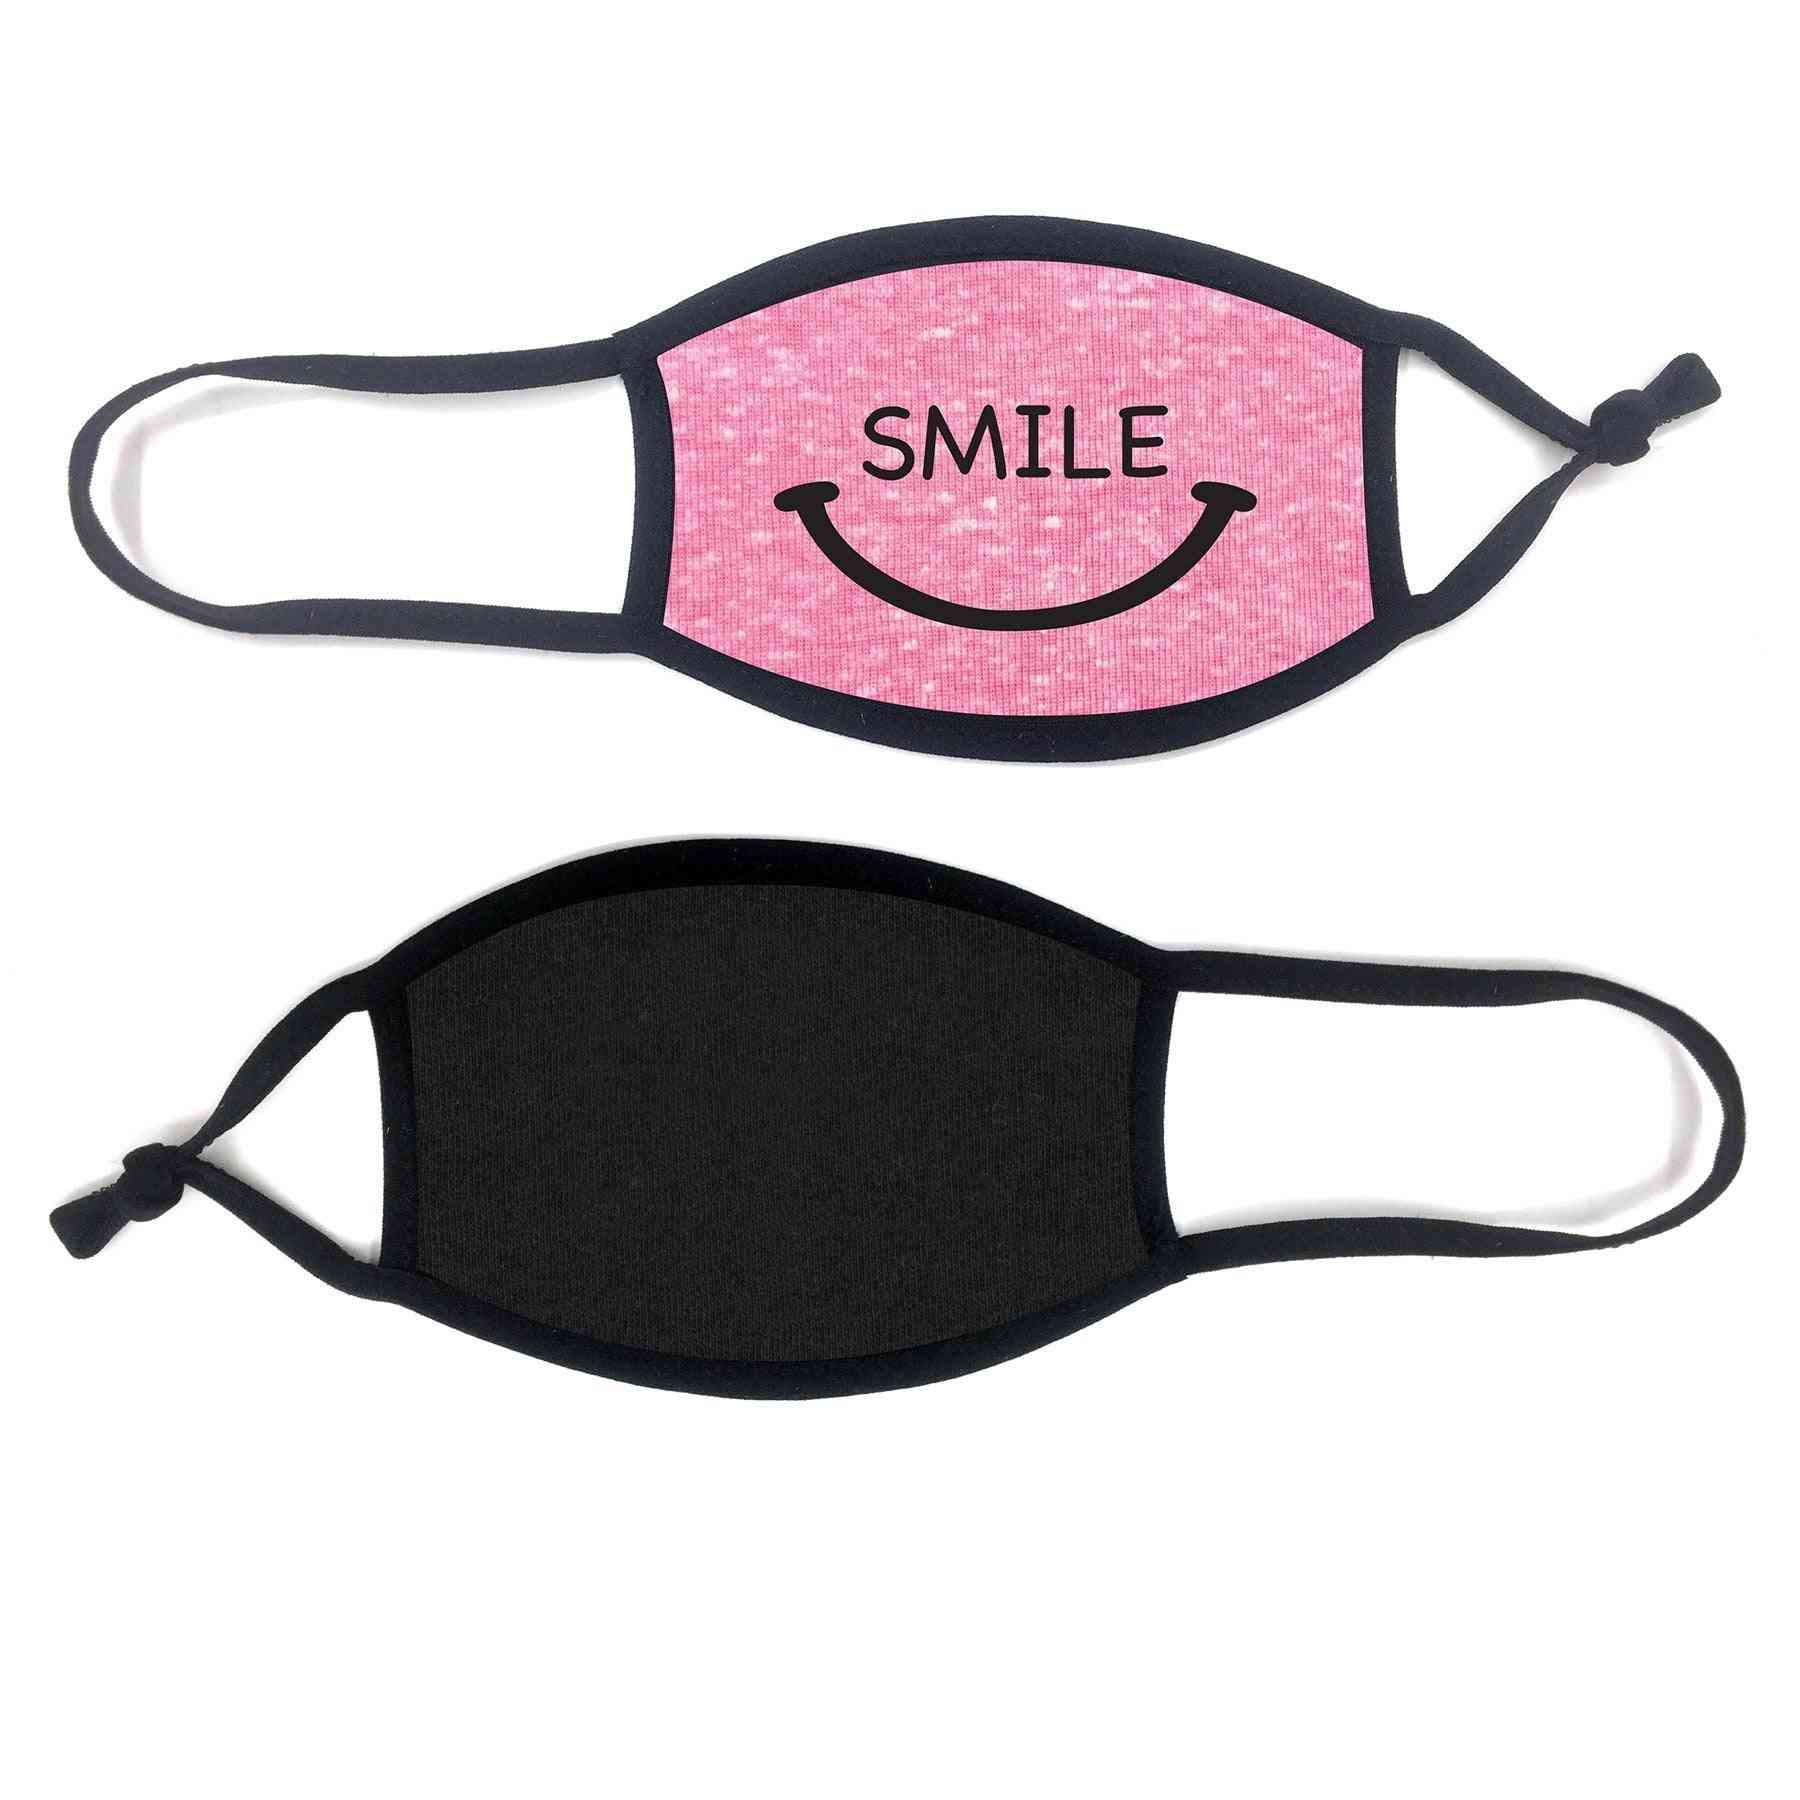 100% Cotton Made Fabric Face Mask, Smile Printed